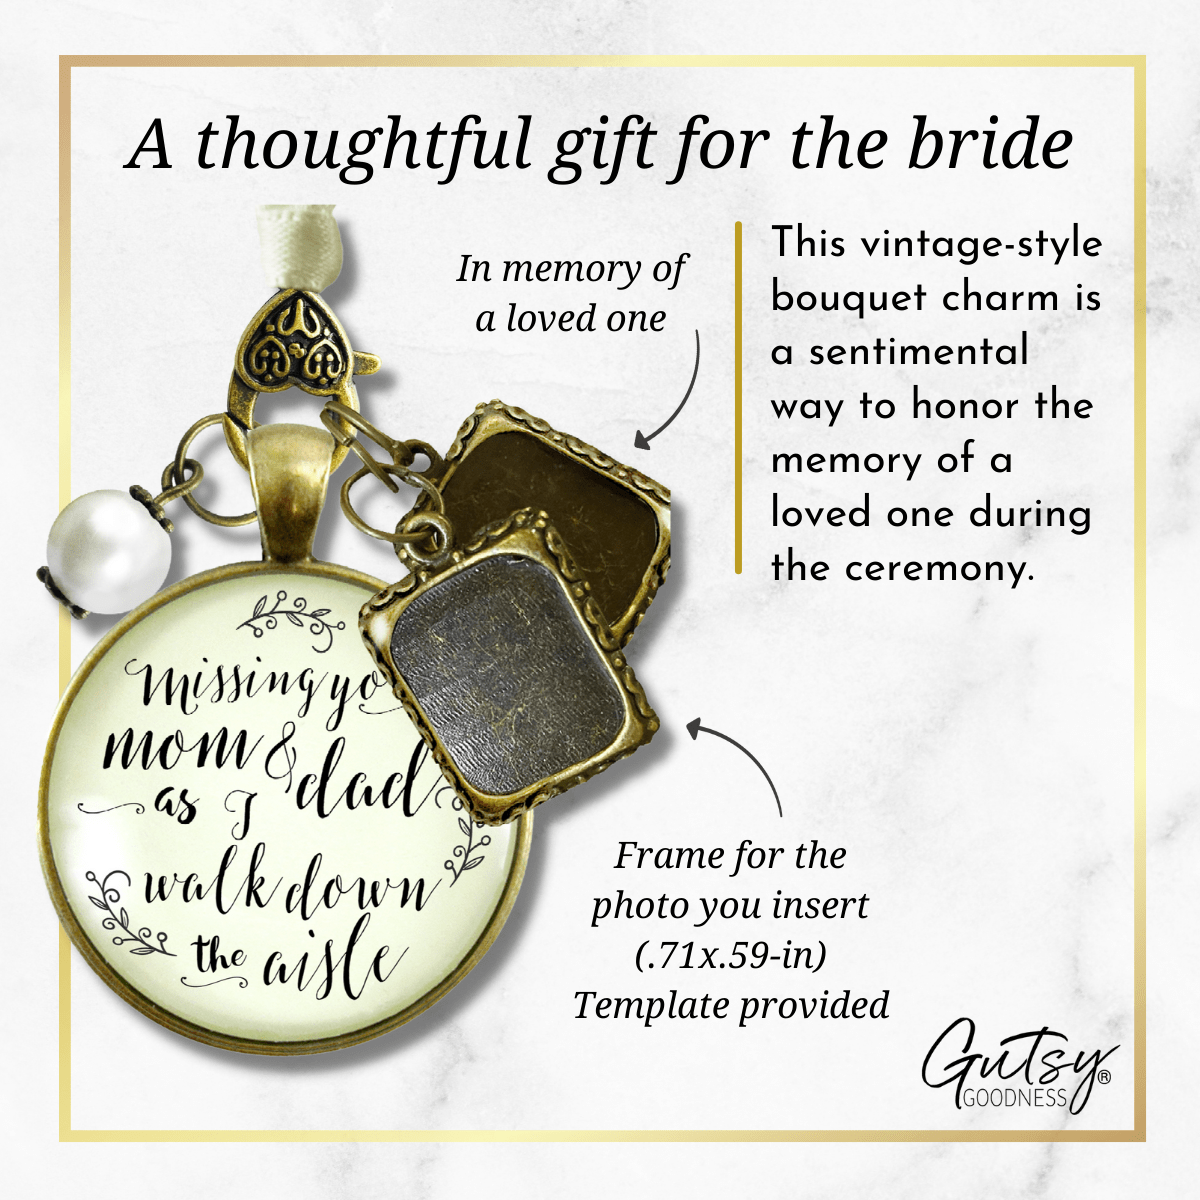 Bouquet Charm Mom And Dad Of Bride Vintage Parents Memory Wedding Jewels - Gutsy Goodness Handmade Jewelry Gifts